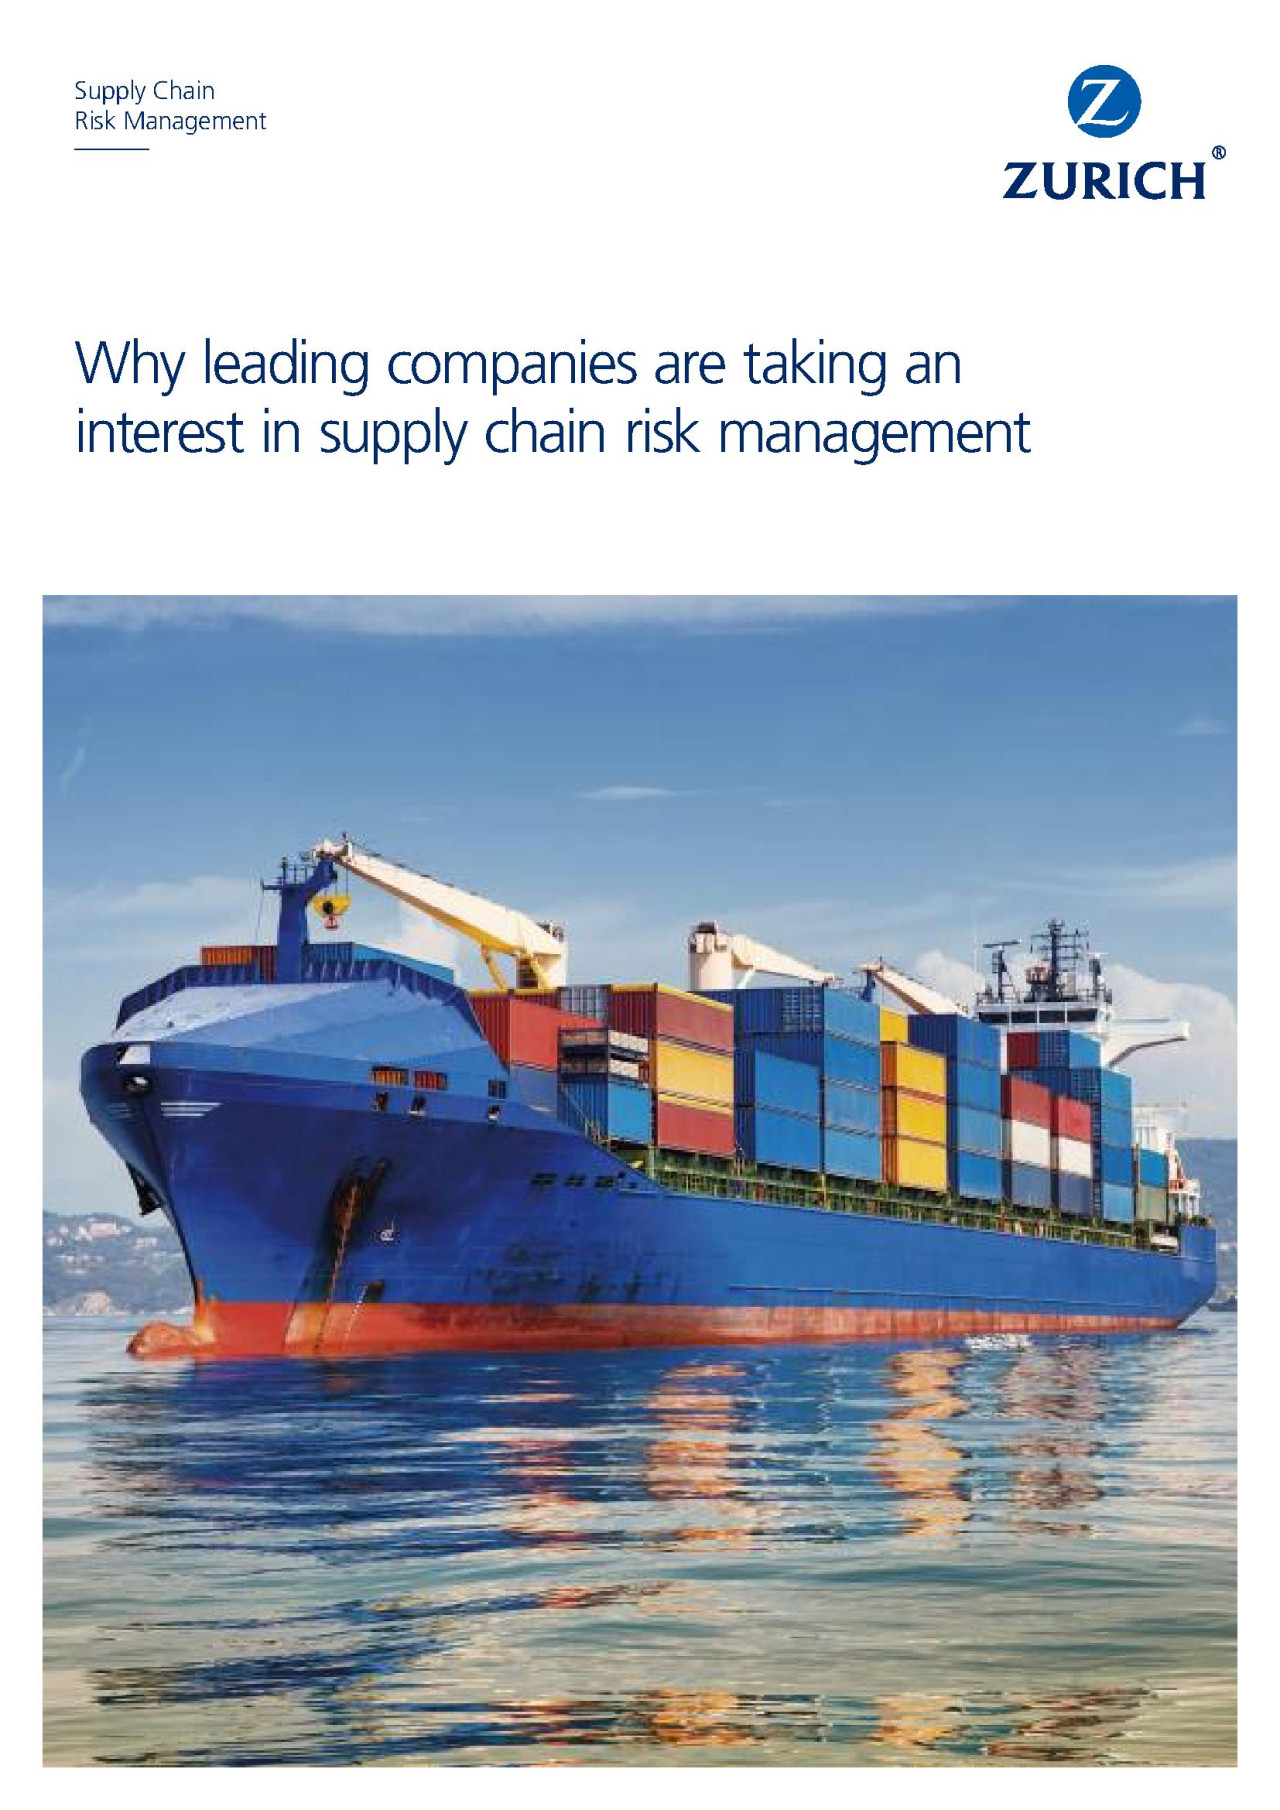 Why leading companies are taking an interest in supply chain risk management